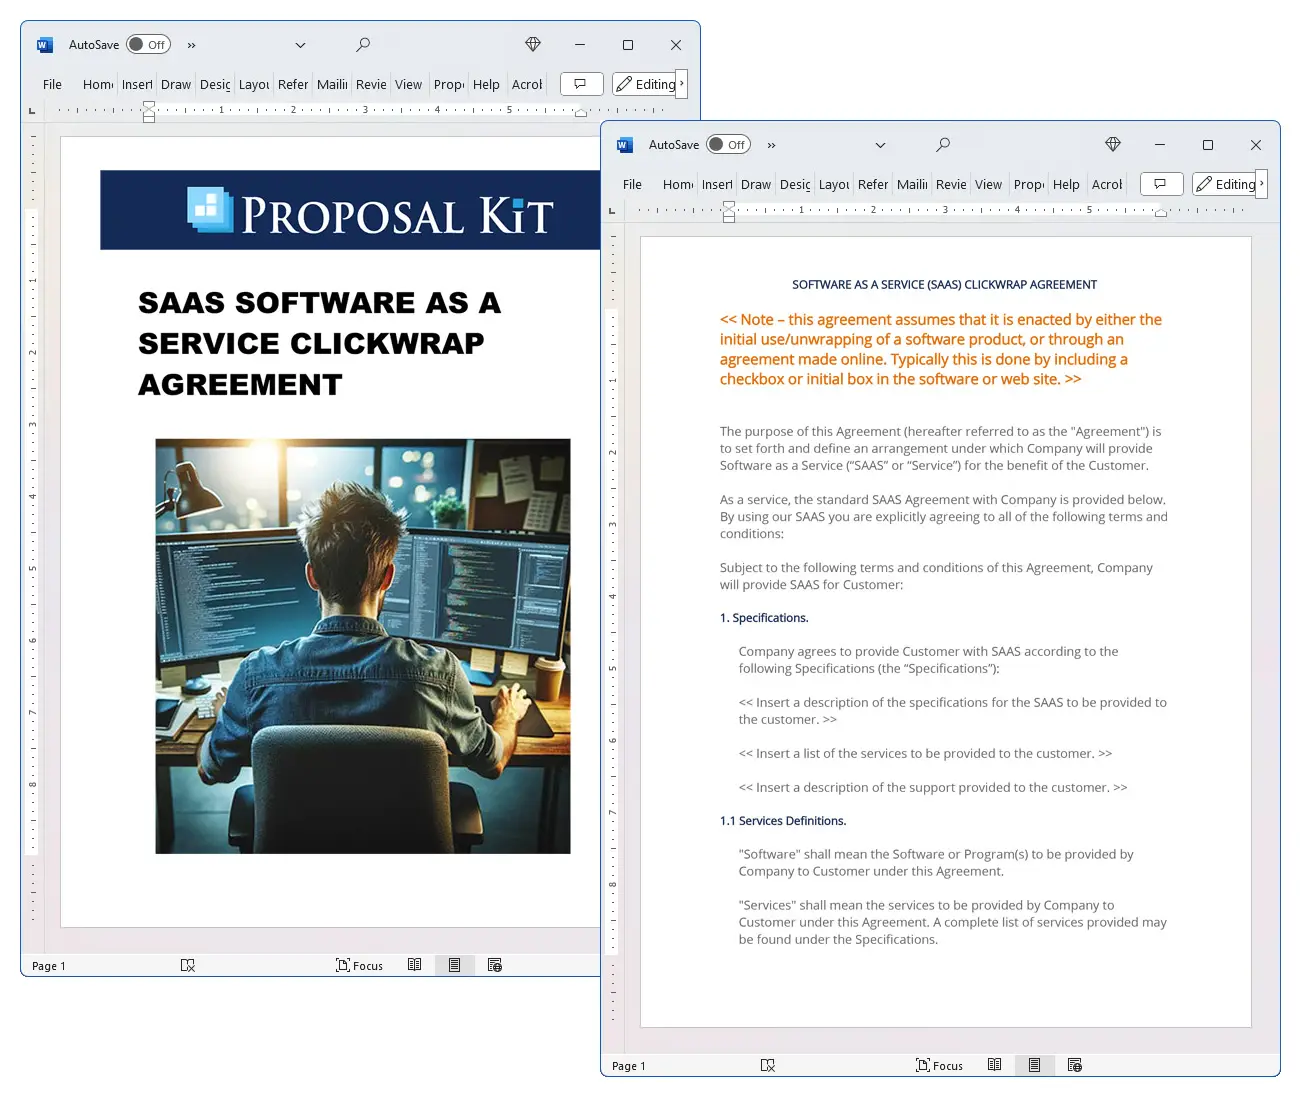 SAAS Software as a Service Clickwrap Agreement Concepts